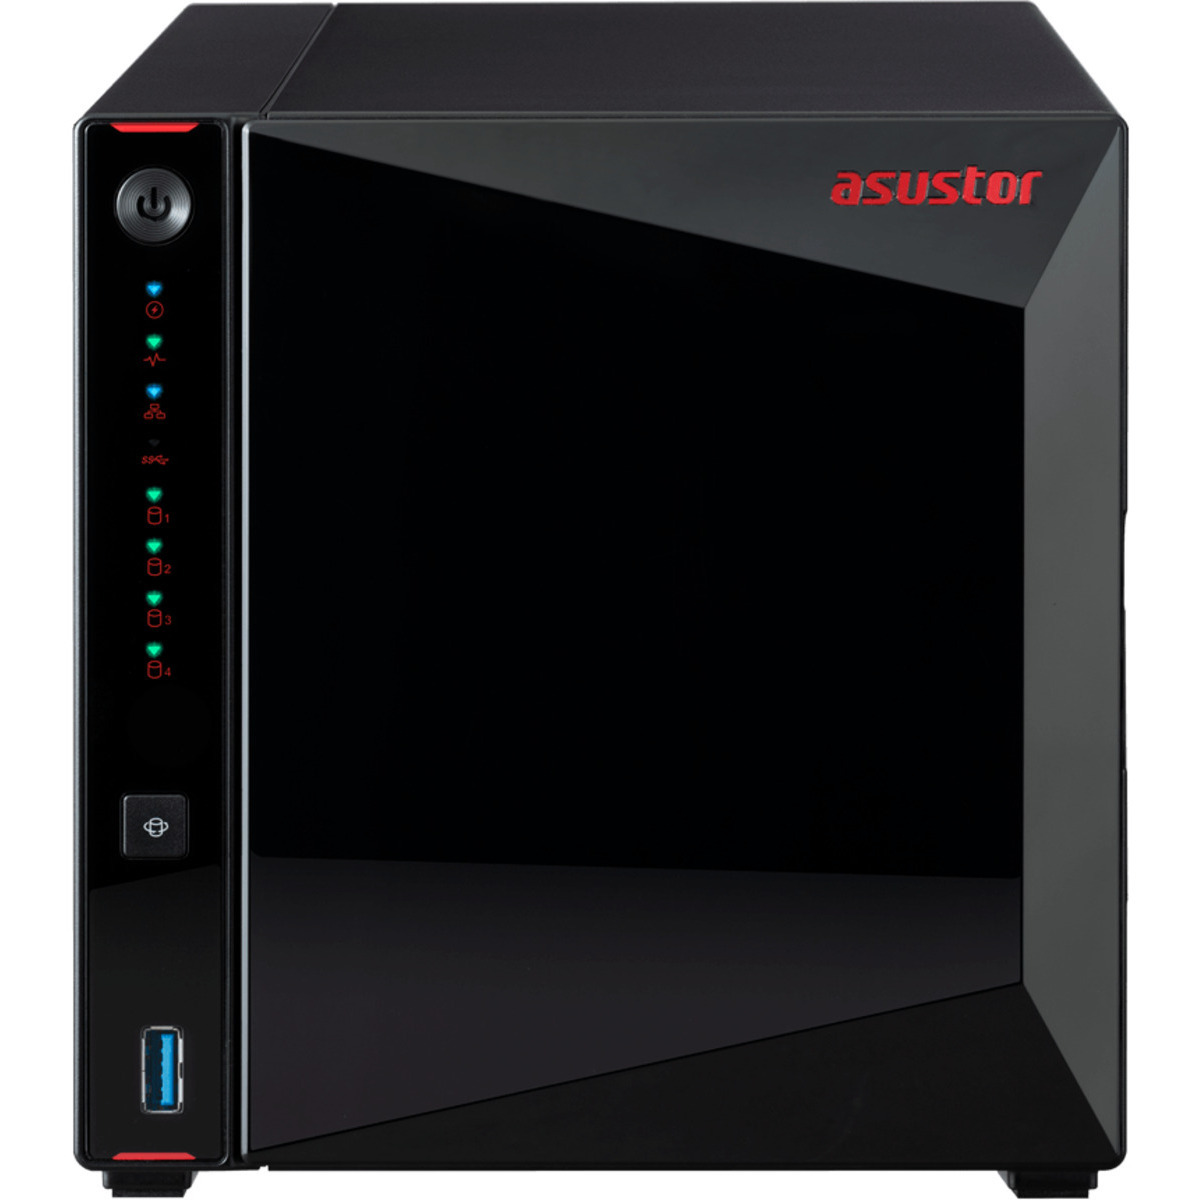 ASUSTOR AS5304T Nimbustor 96tb 4-Bay Desktop Multimedia / Power User / Business NAS - Network Attached Storage Device 4x24tb Seagate EXOS X24 ST24000NM002H 3.5 7200rpm SATA 6Gb/s HDD ENTERPRISE Class Drives Installed - Burn-In Tested - FREE RAM UPGRADE AS5304T Nimbustor